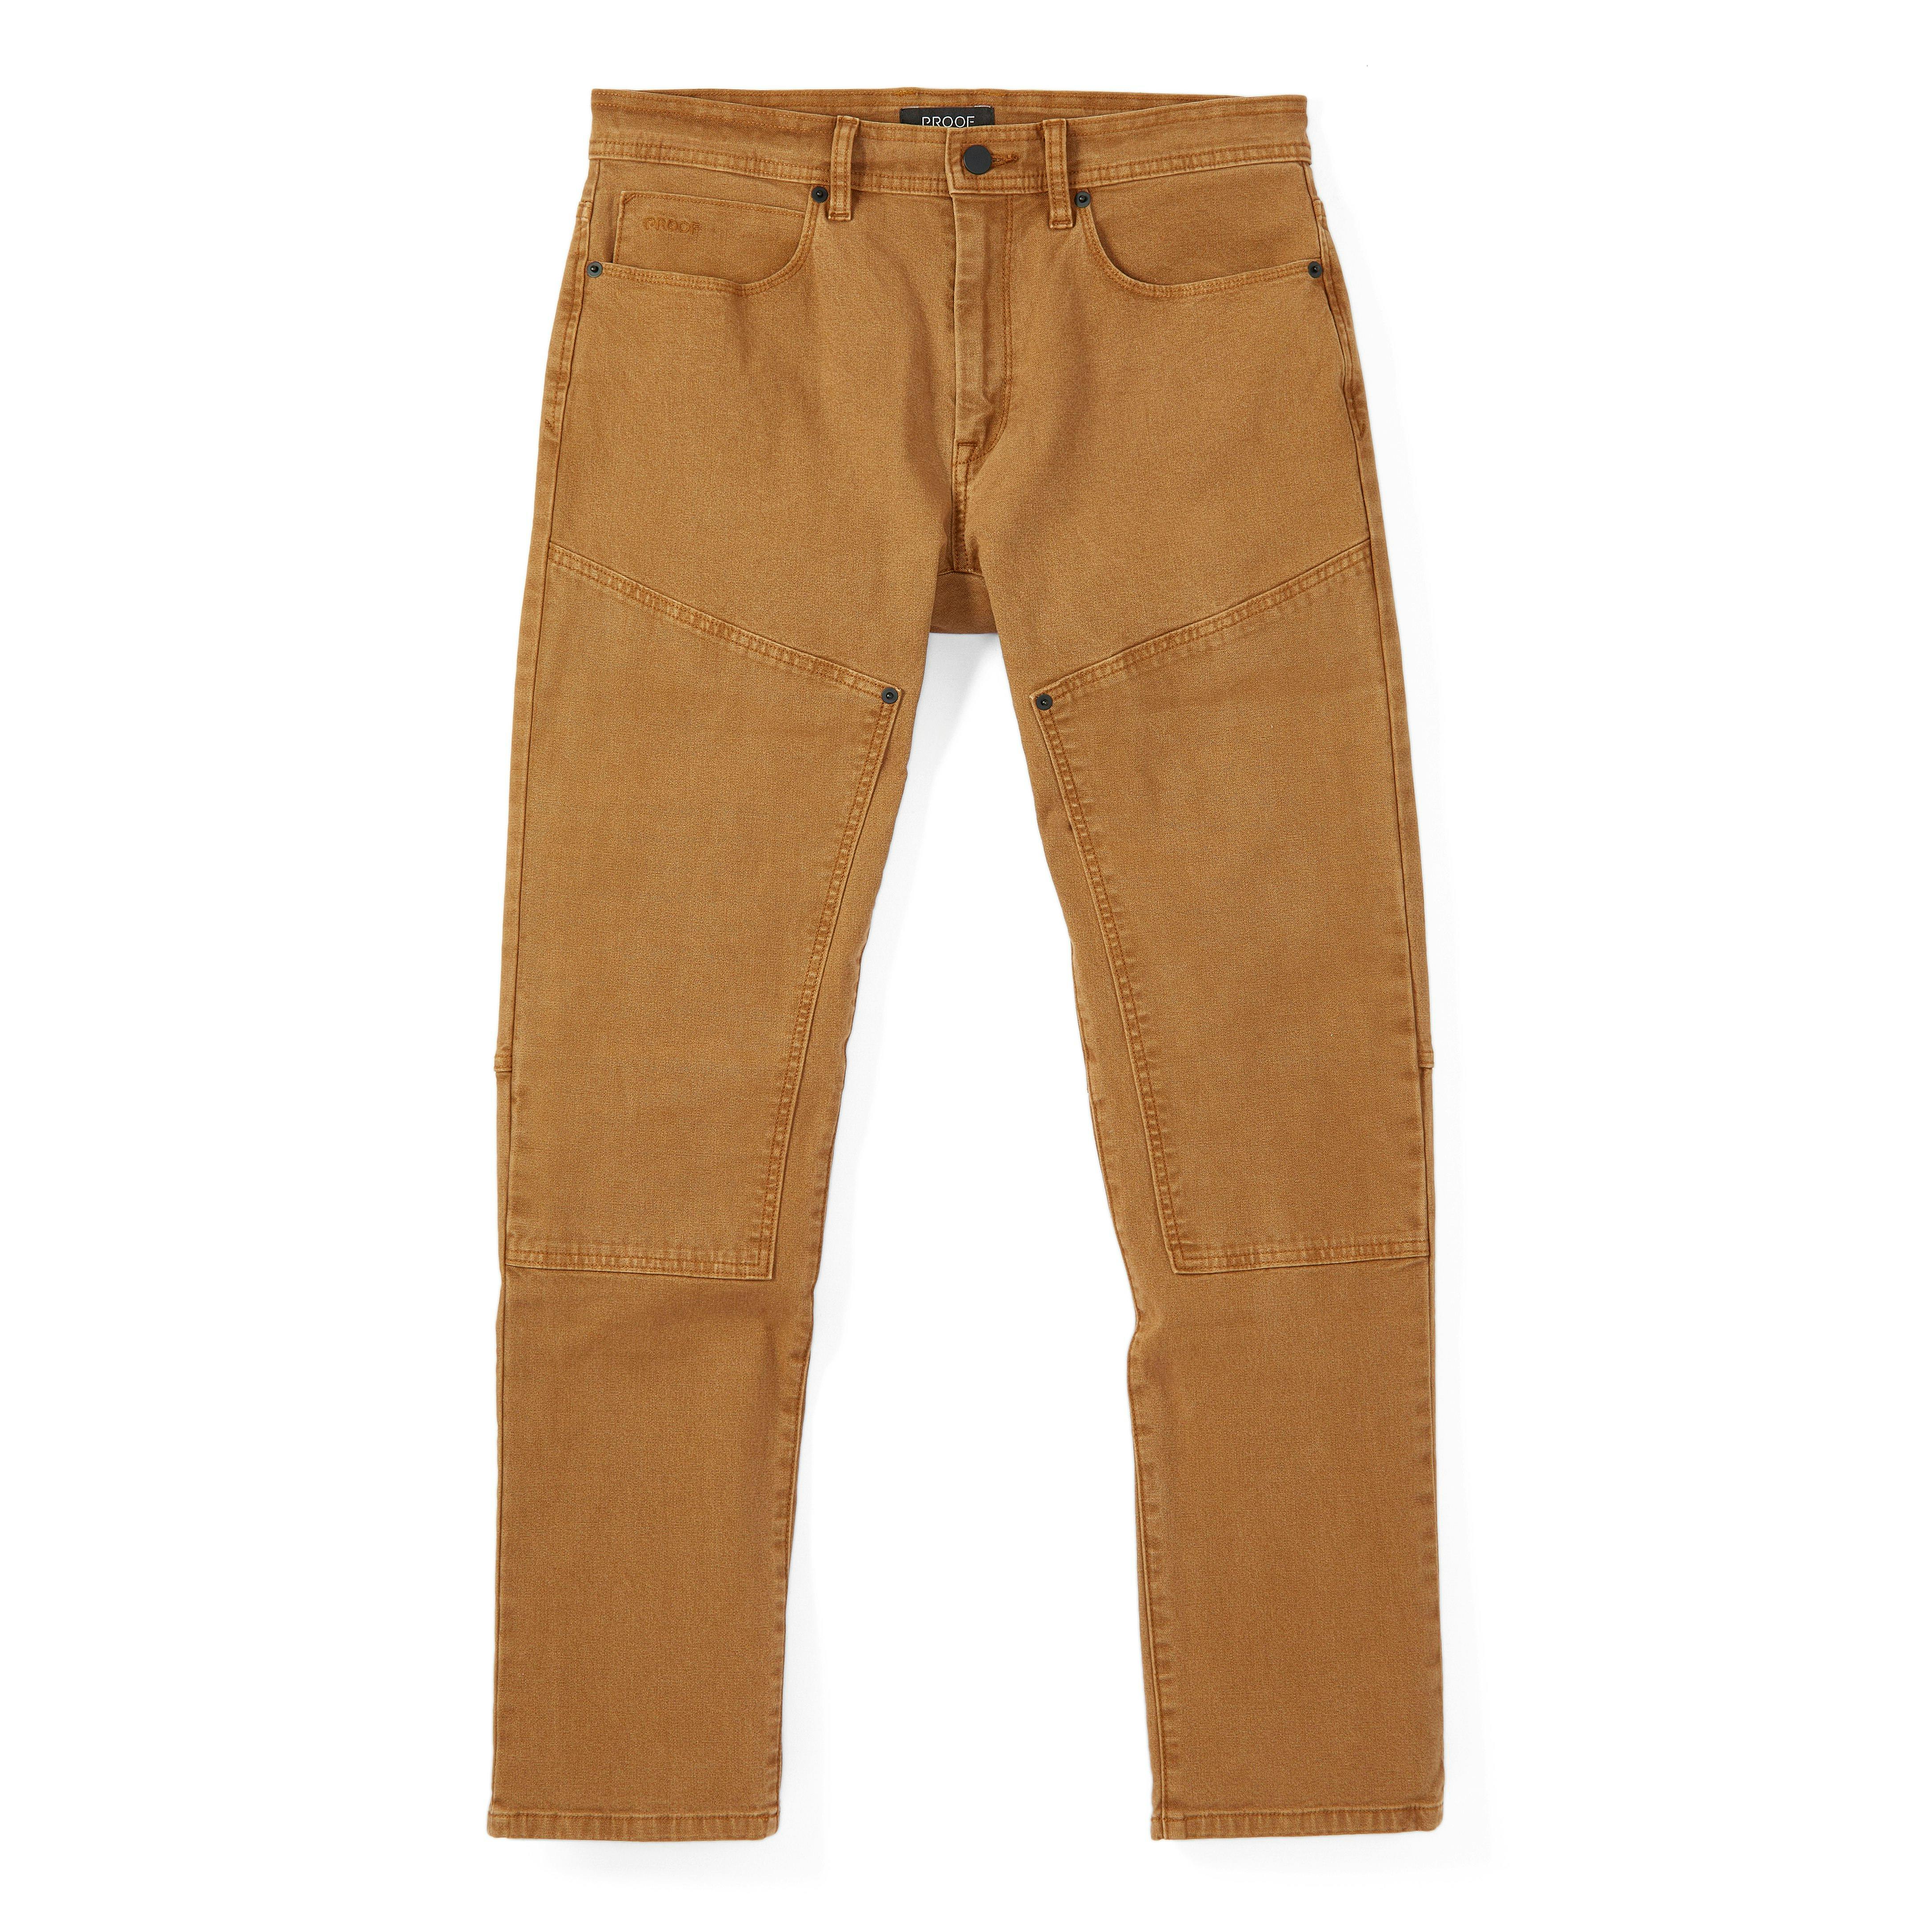 | Pants Work Pant Slim | Proof Canyon Double-Knee Rover - - Huckberry Work